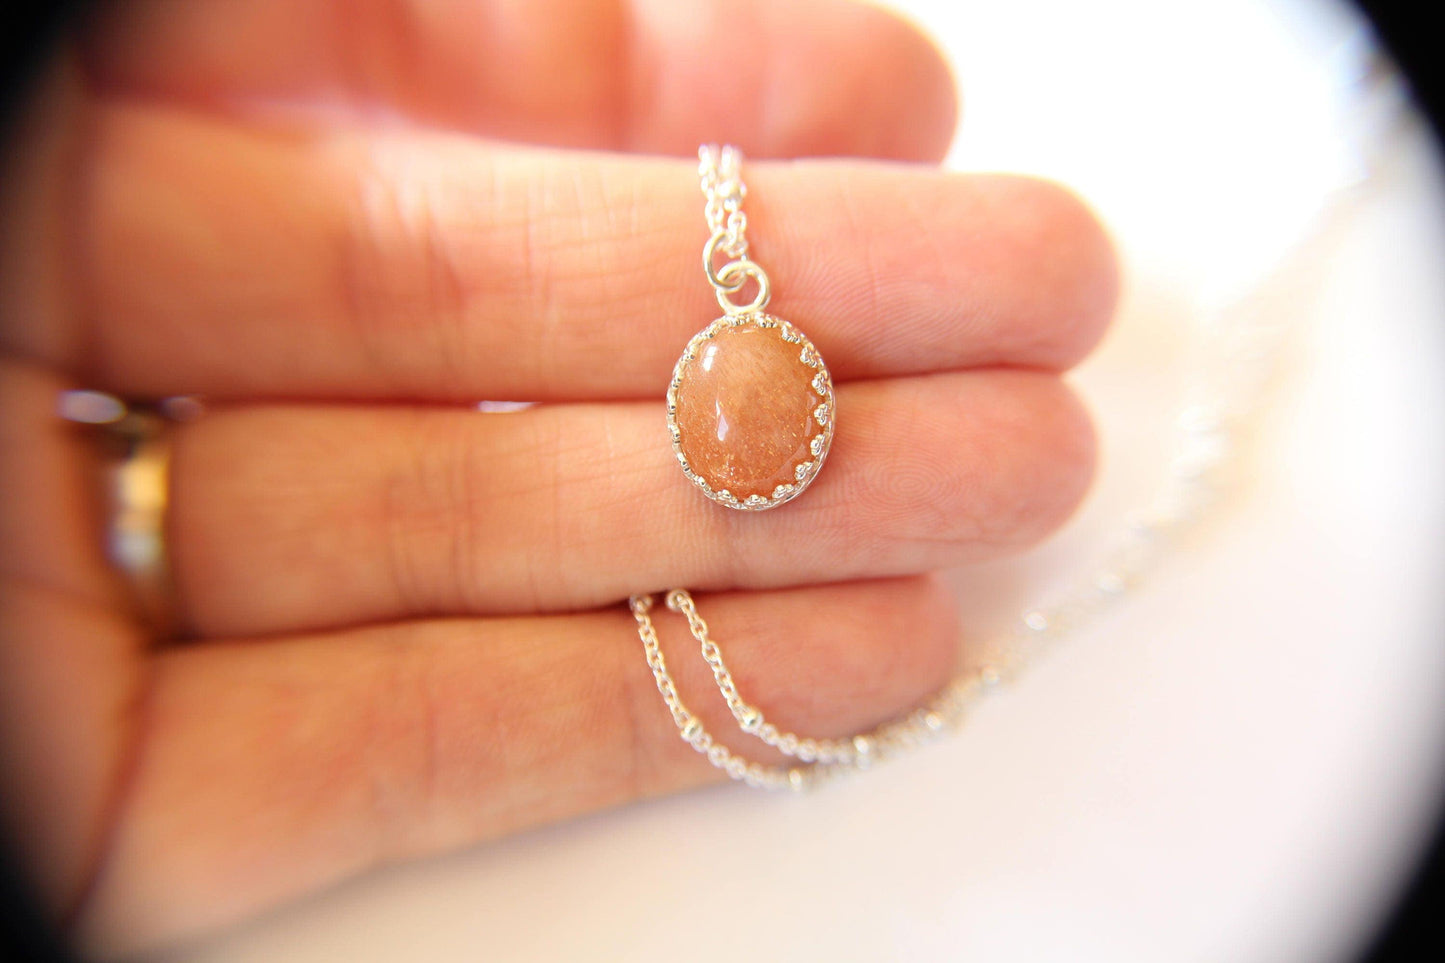 Sunstone Necklace, Victorian Necklace, Necklace, Stone Pendant, Speckled Sunstone Pendant Necklace, Boho Necklace, Layer Necklace, Gift